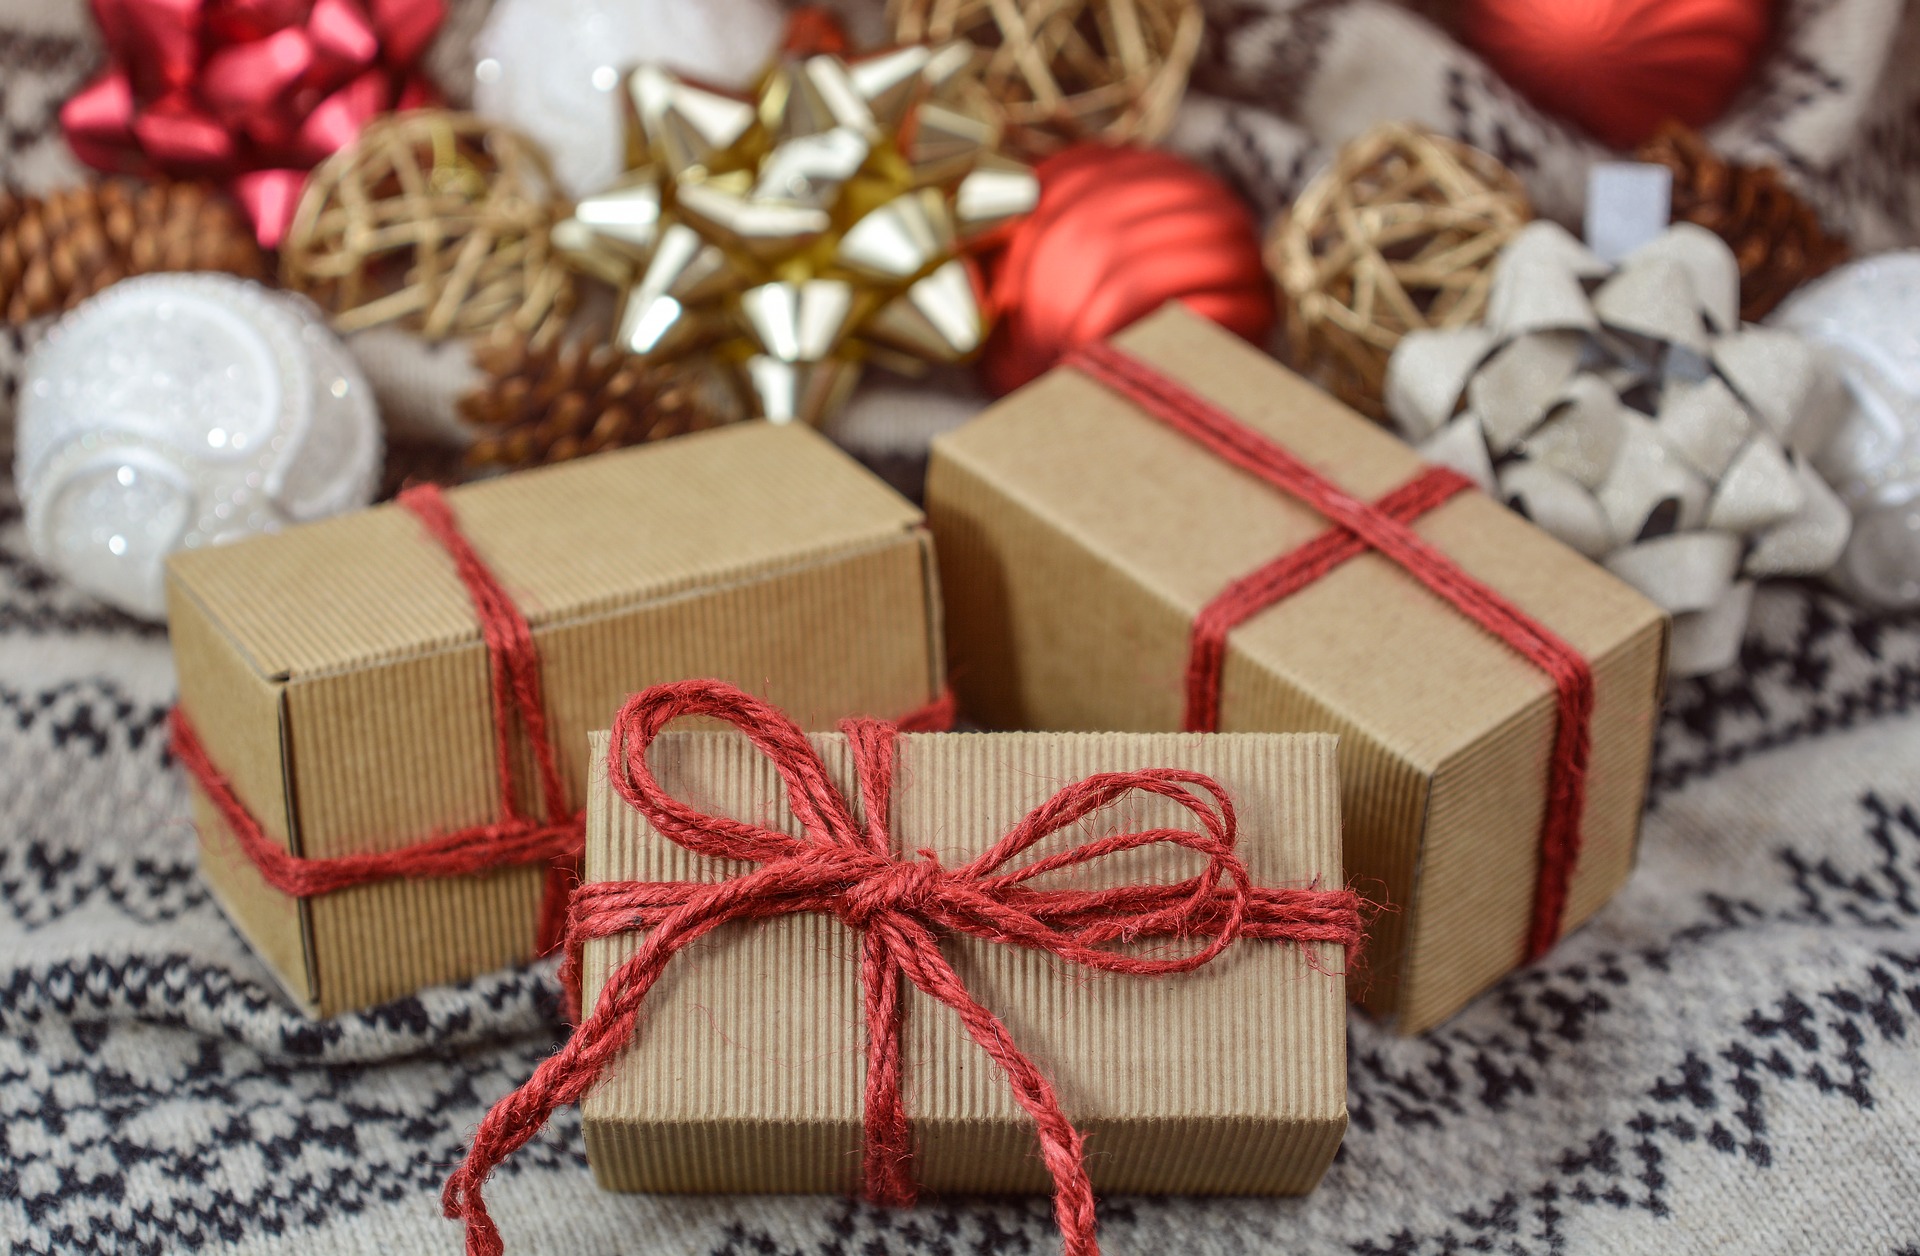 Christmas Gifts for Parents From Students – 7 Handmade Gift Ideas